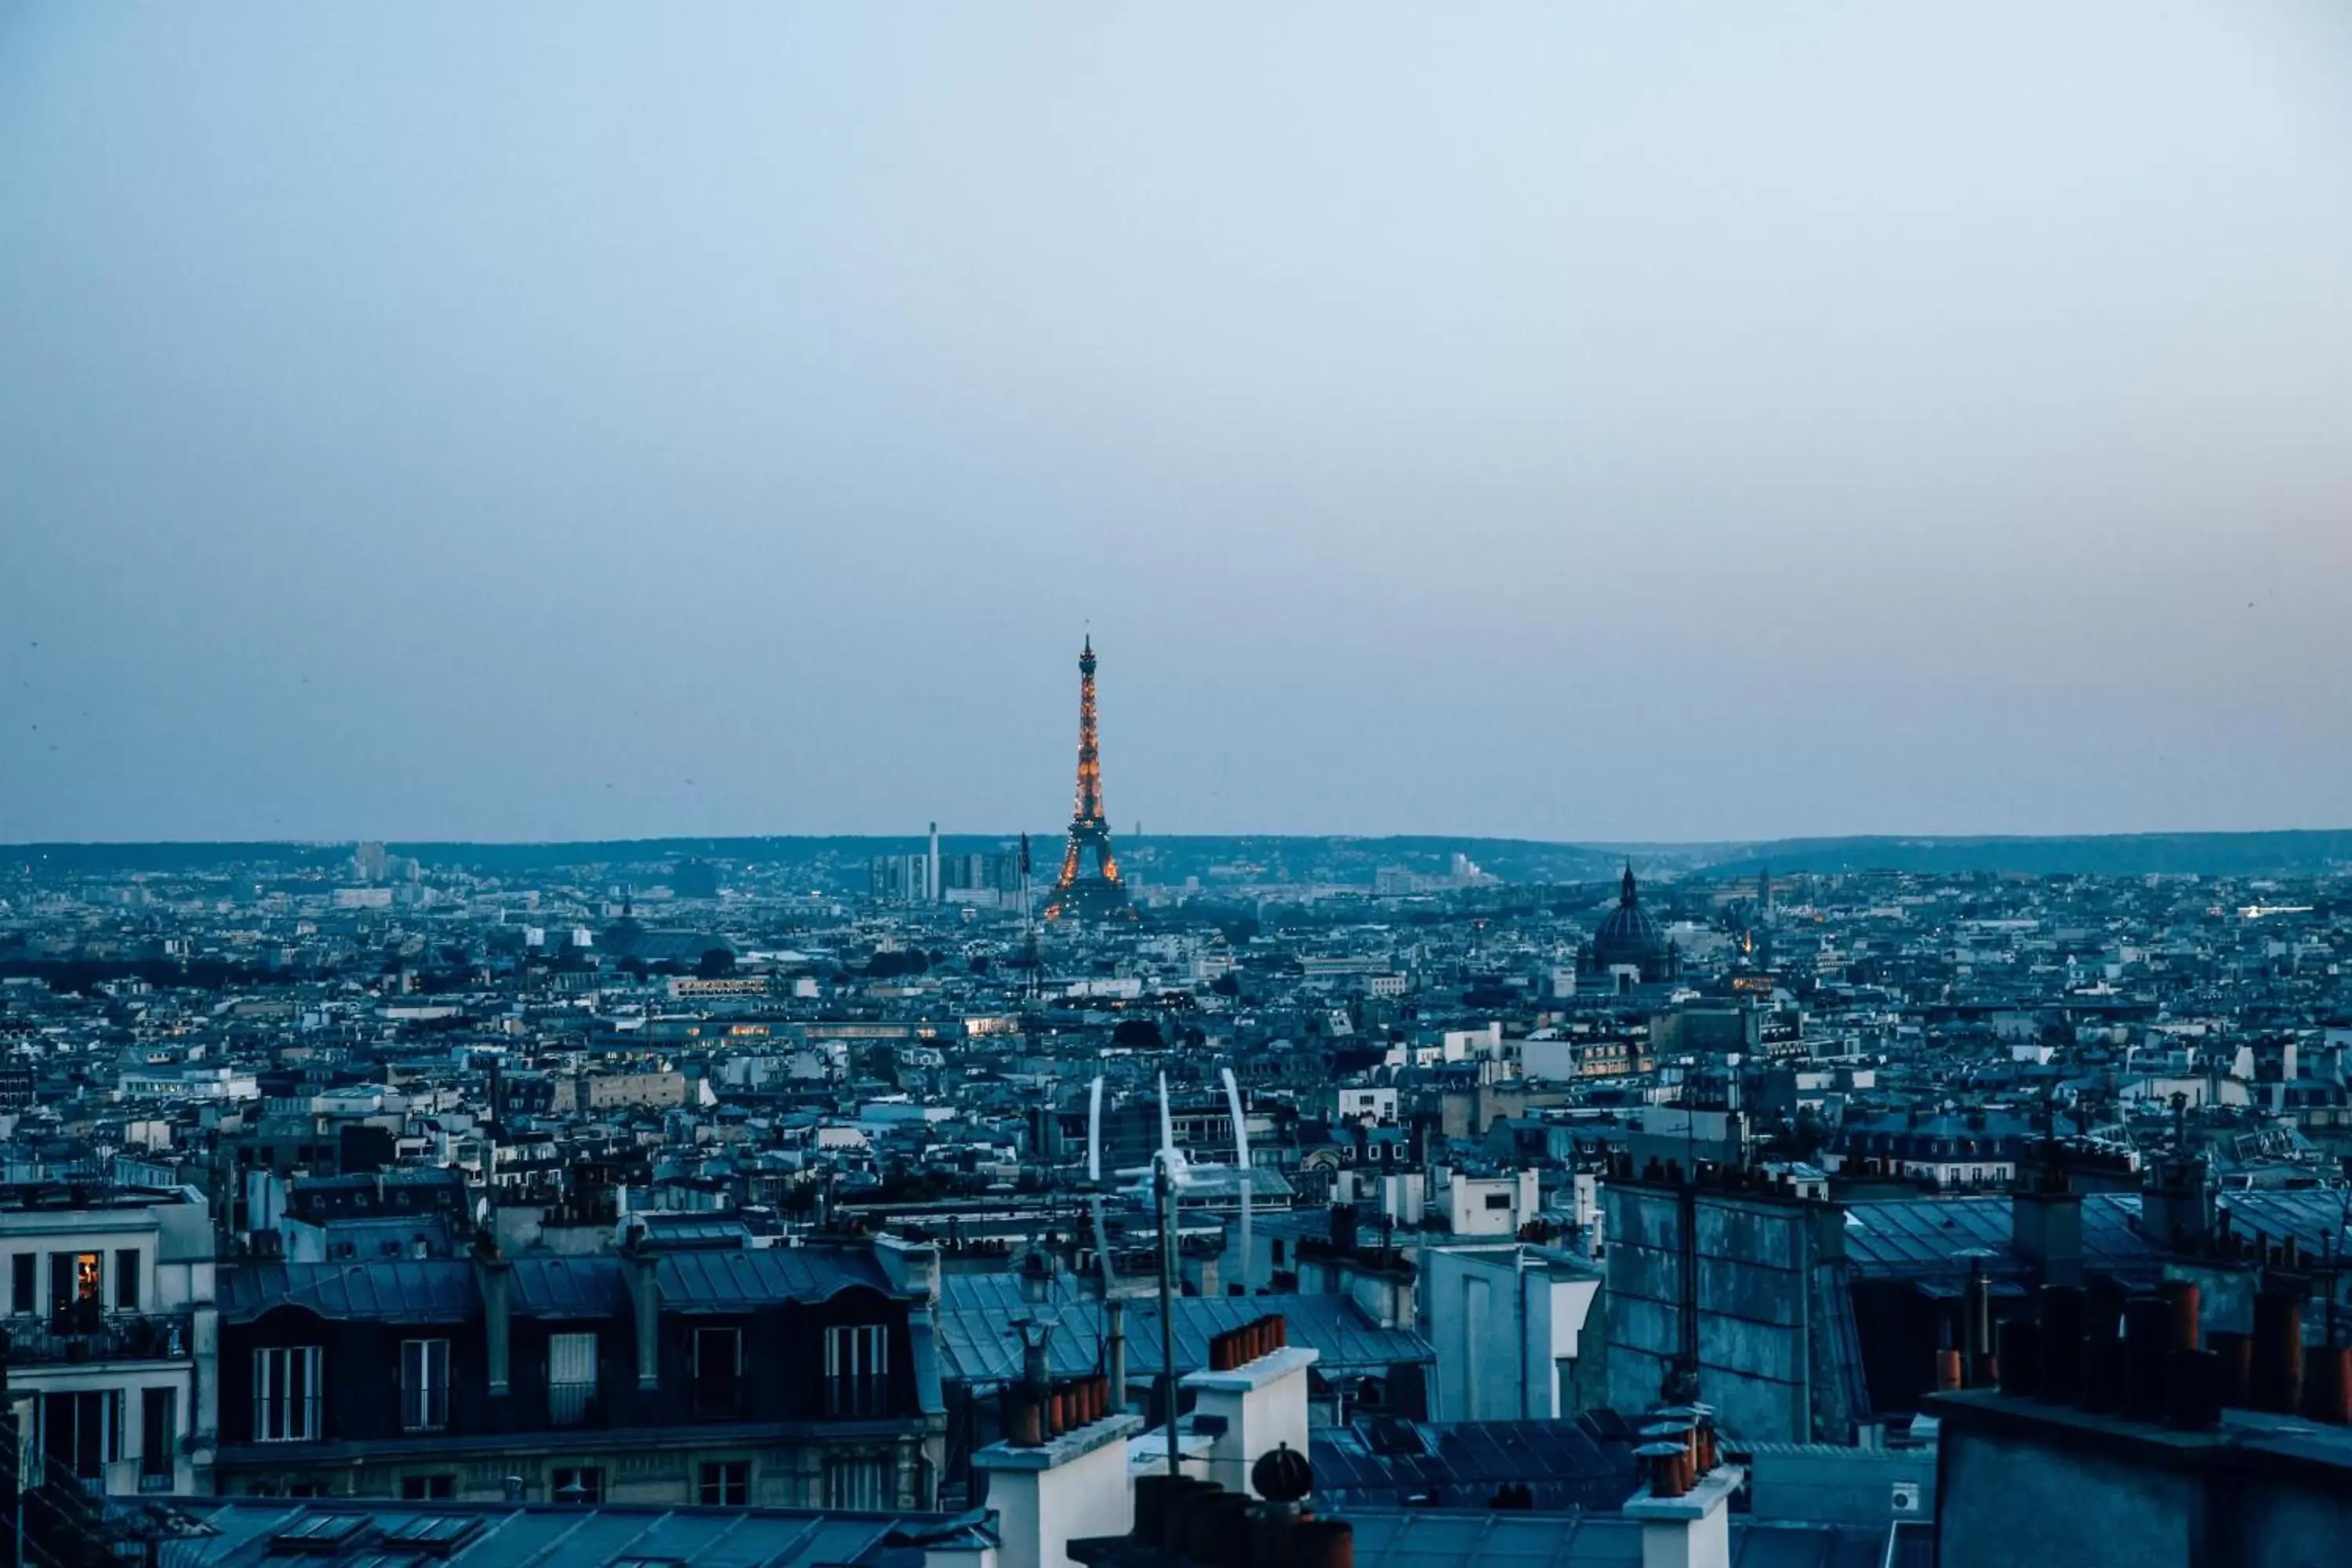 City view in Timhotel Montmartre